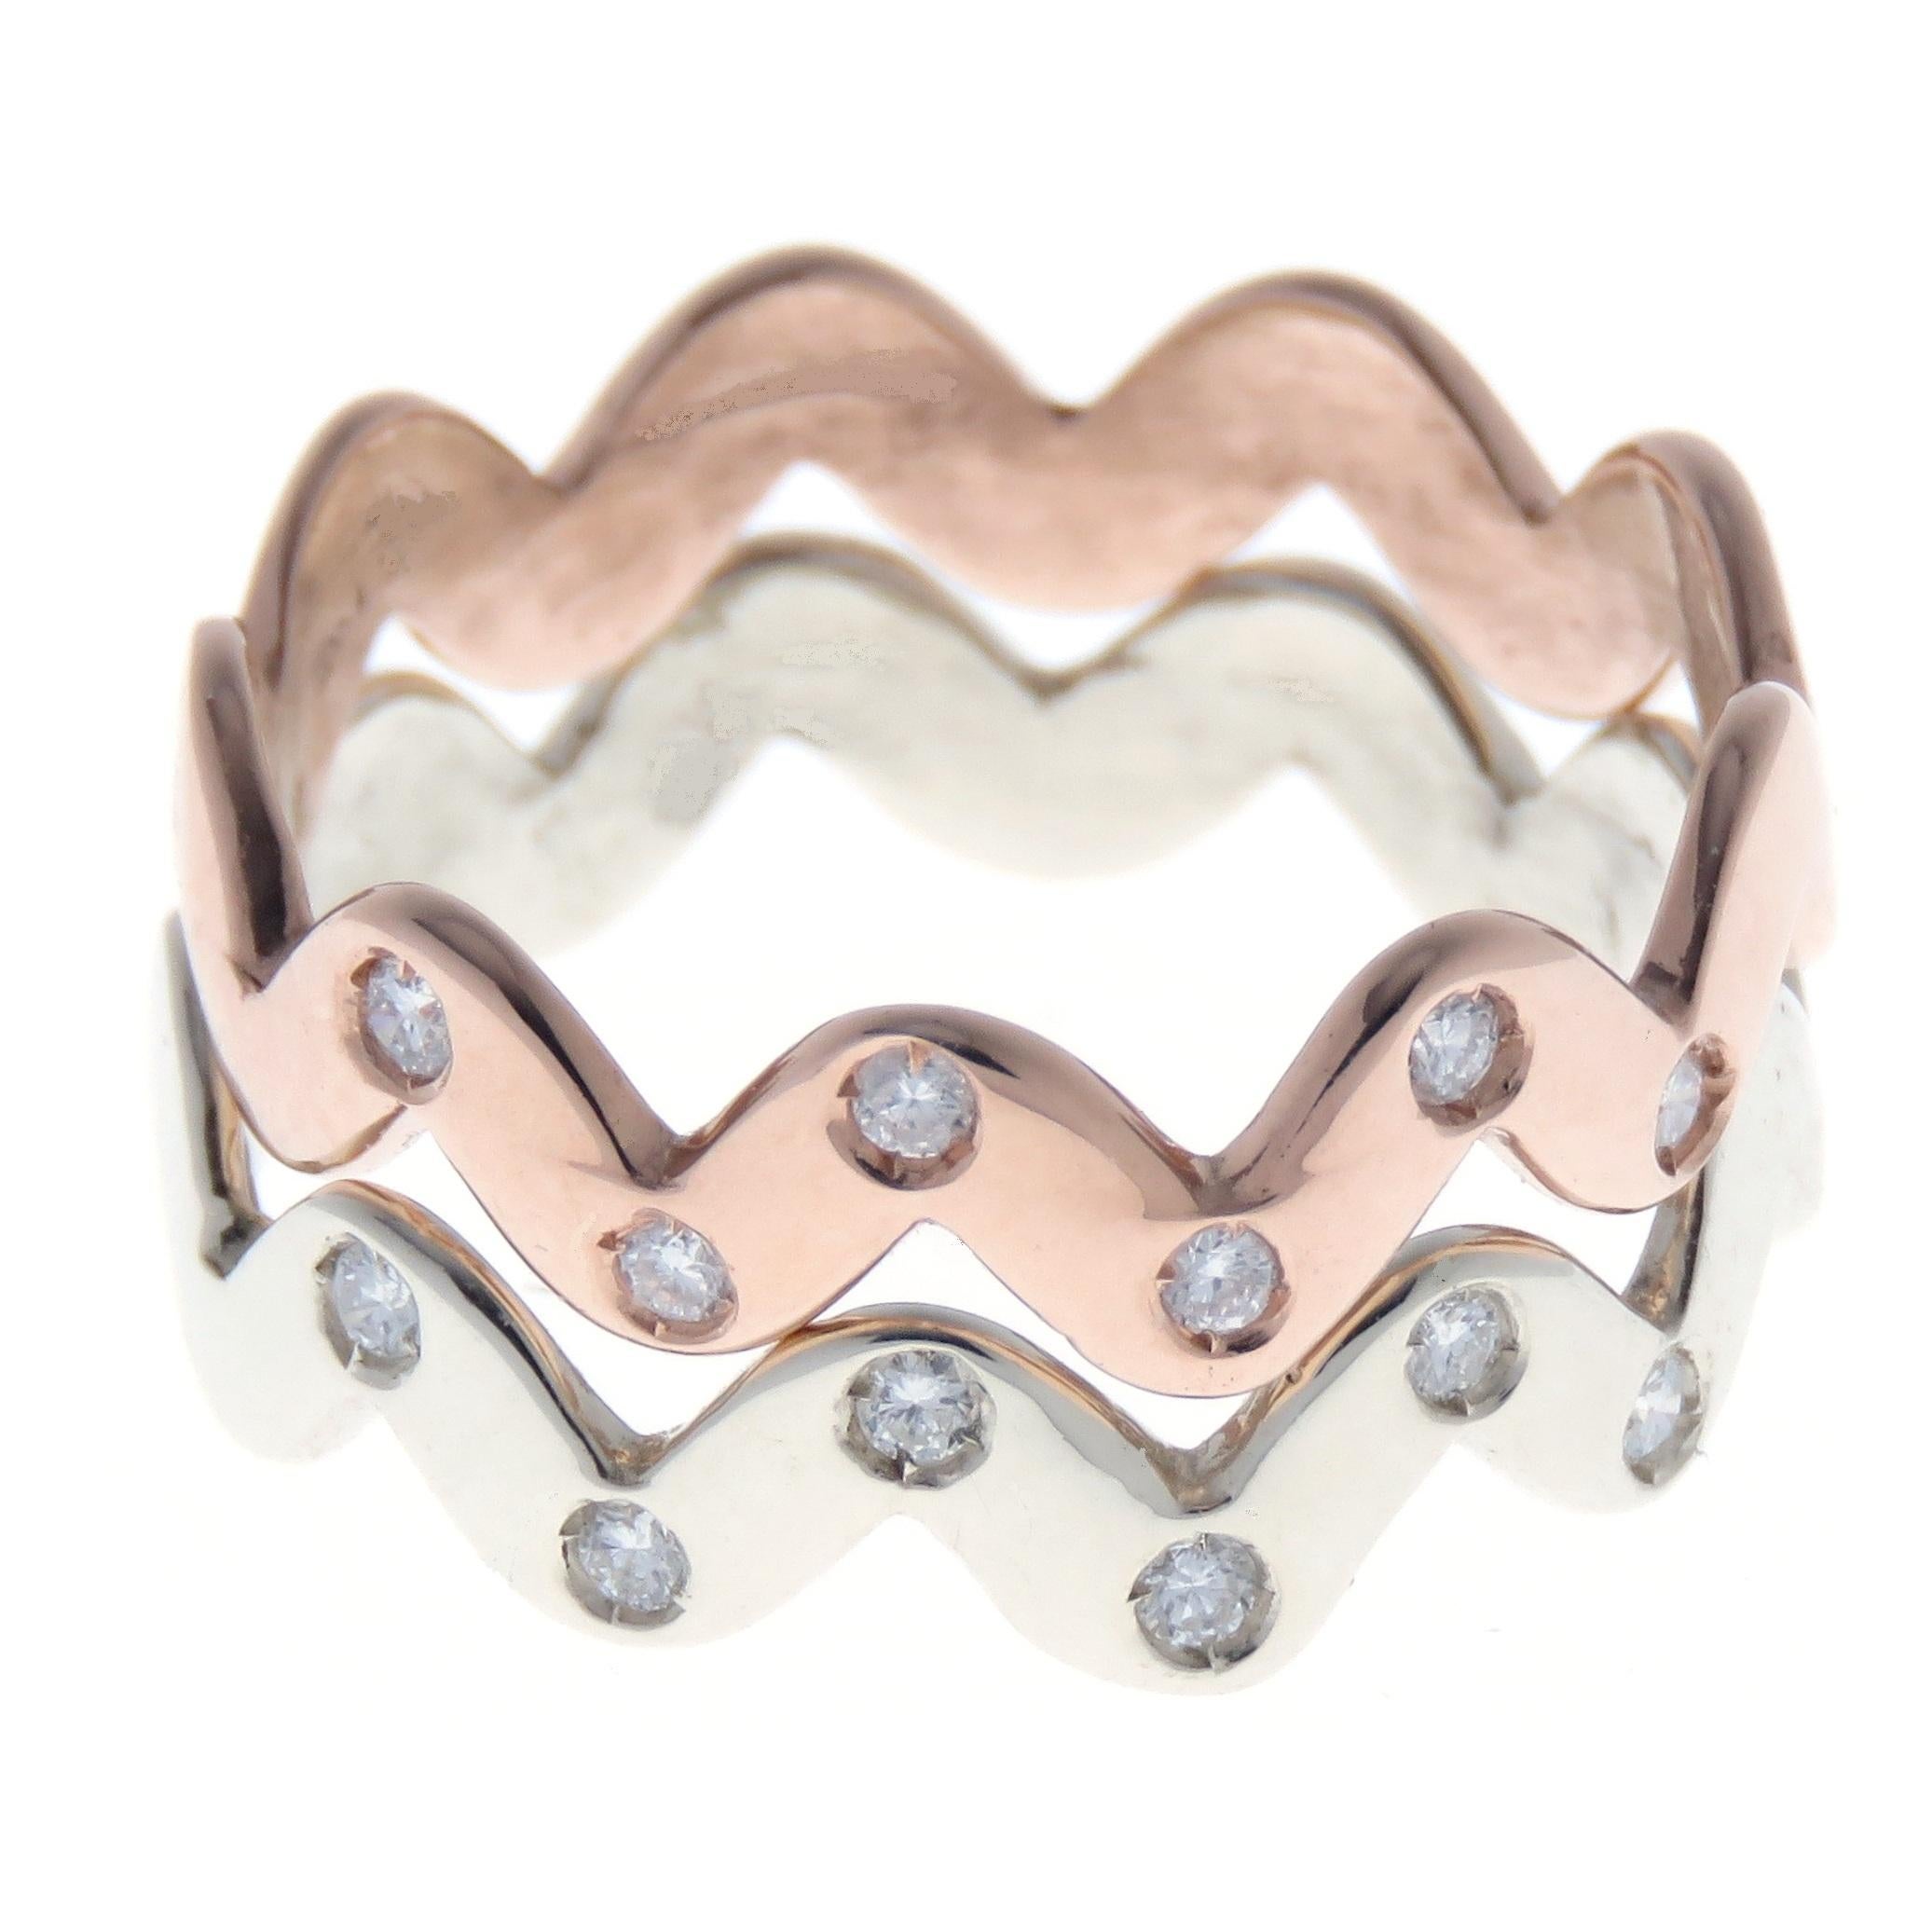 Brilliant Cut Diamonds 9 Karat Rose Gold Zig Zag Stacking Ring Handcrafted in Italy For Sale